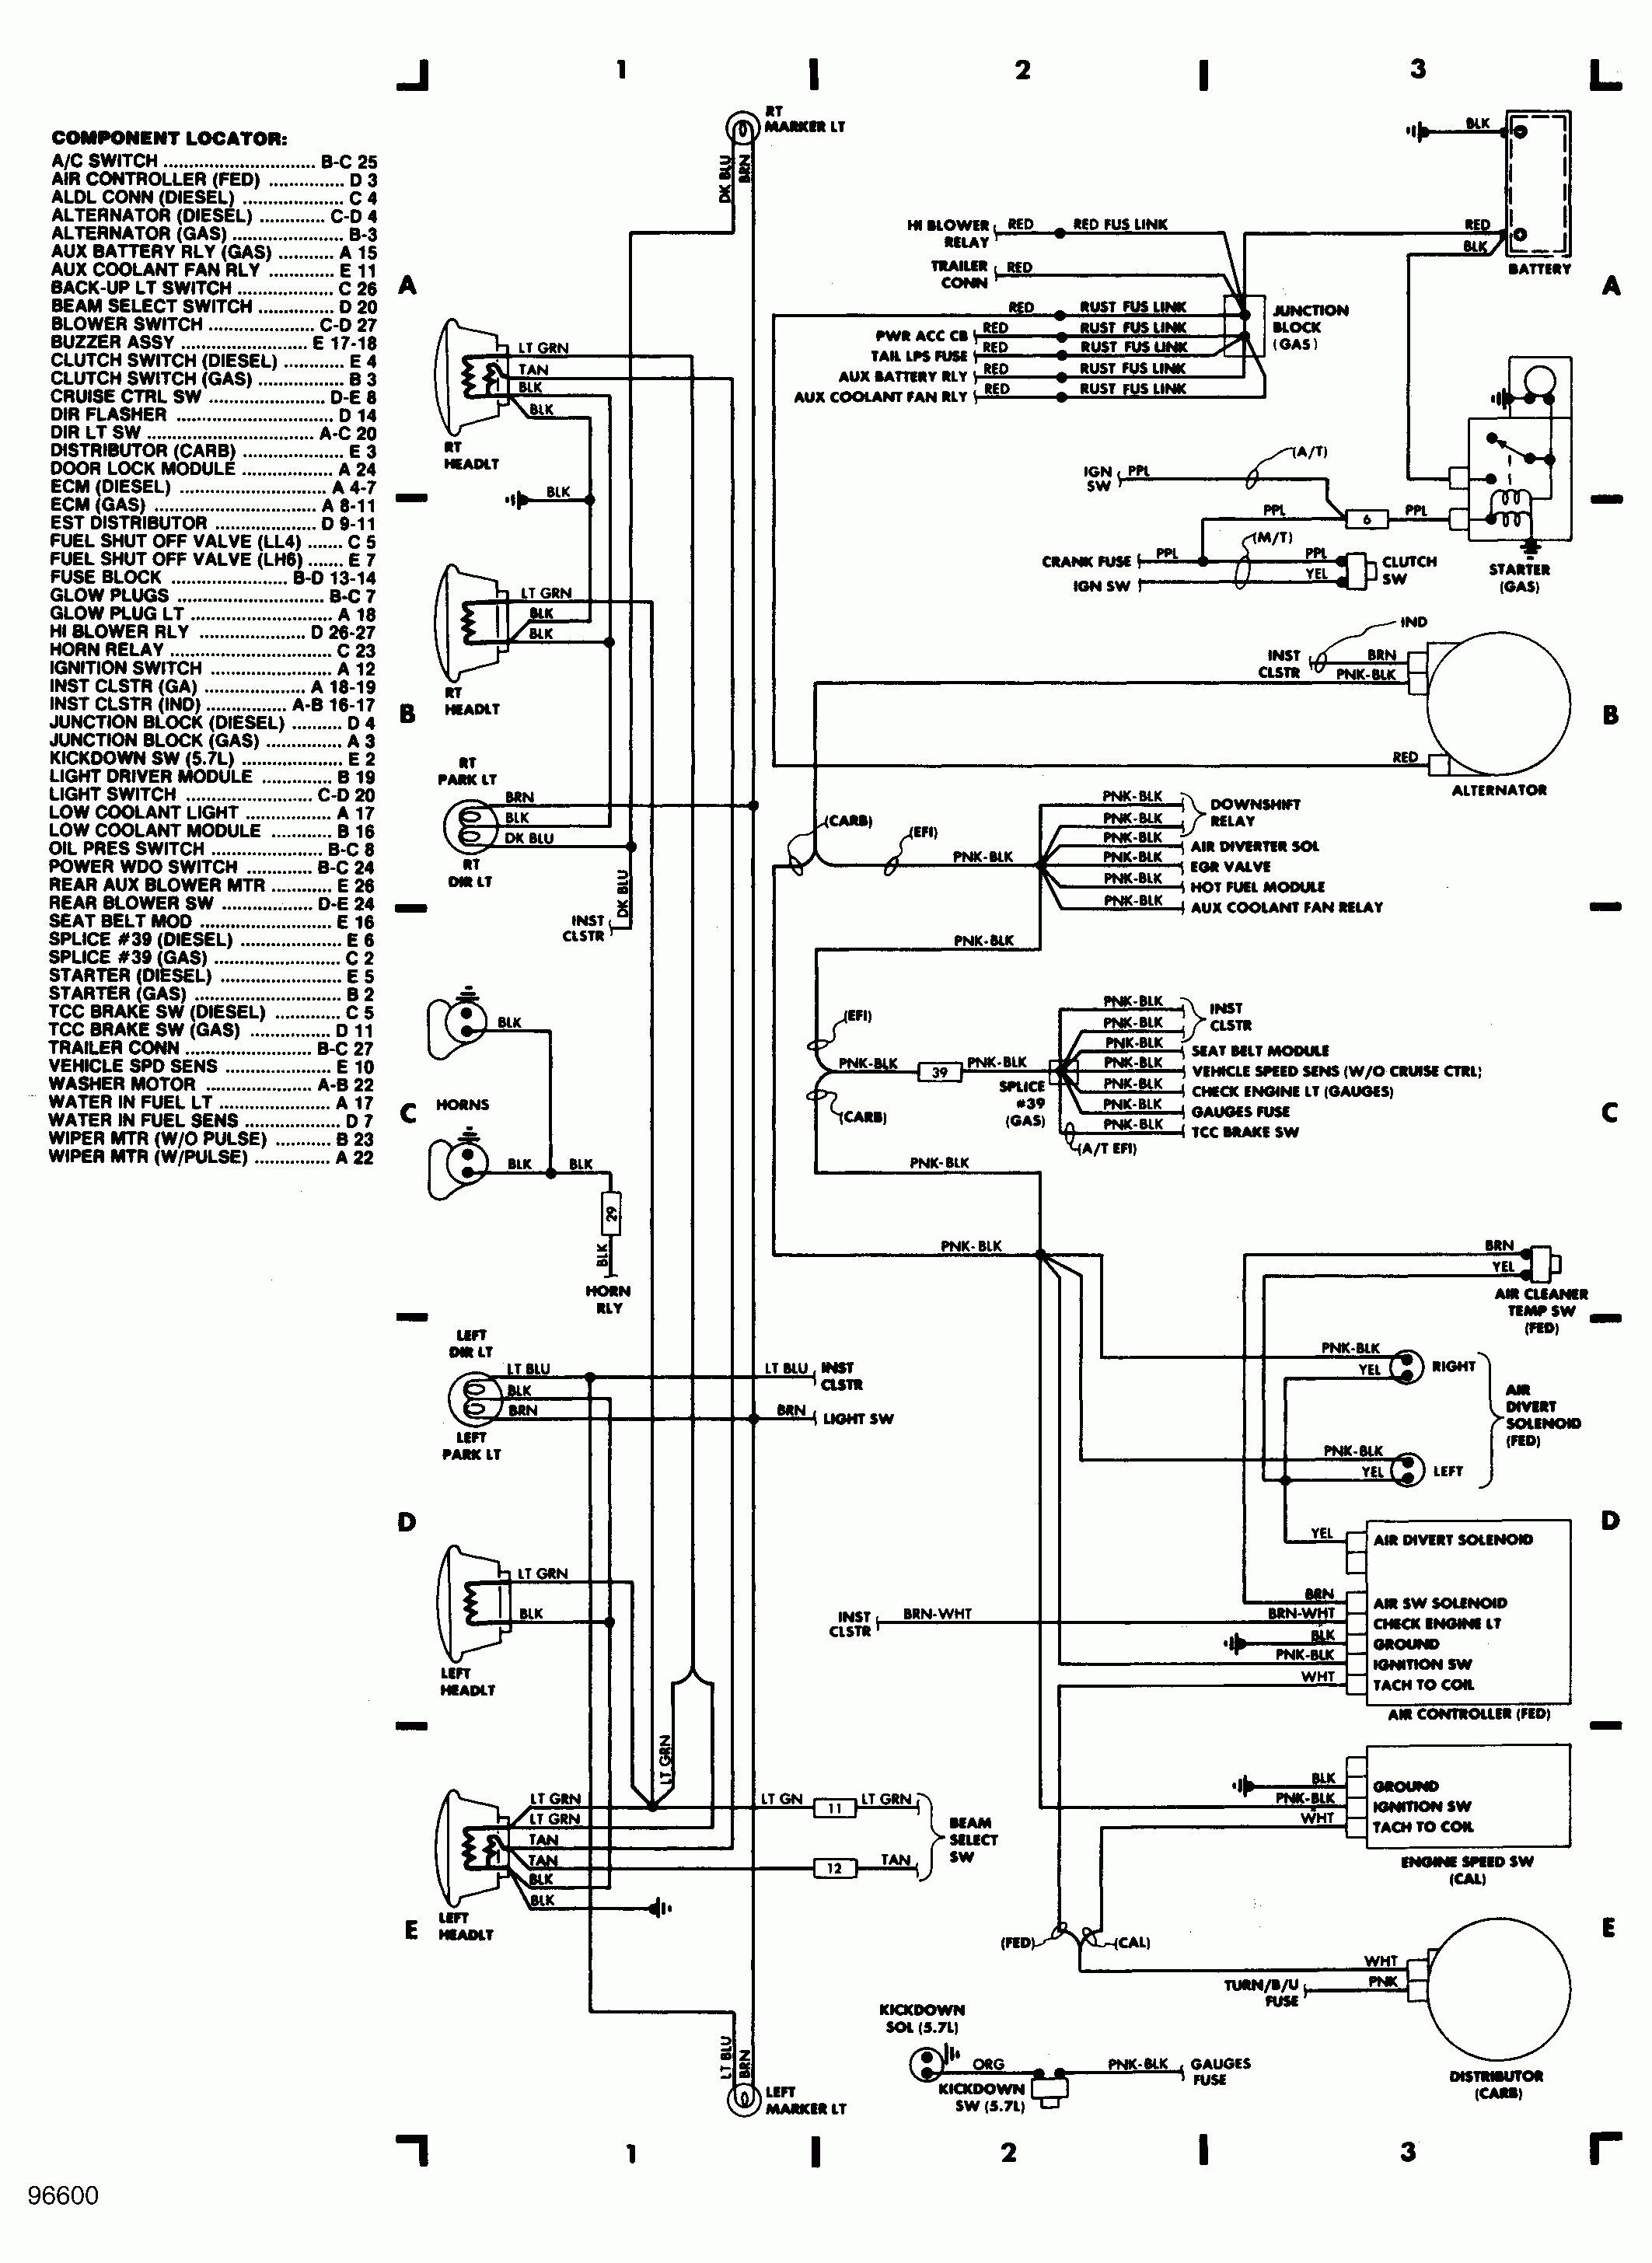 Gm 4L60E Neutral Safety Switch Wiring Diagram 2001 | Wiring Diagram - 4L60E Neutral Safety Switch Wiring Diagram